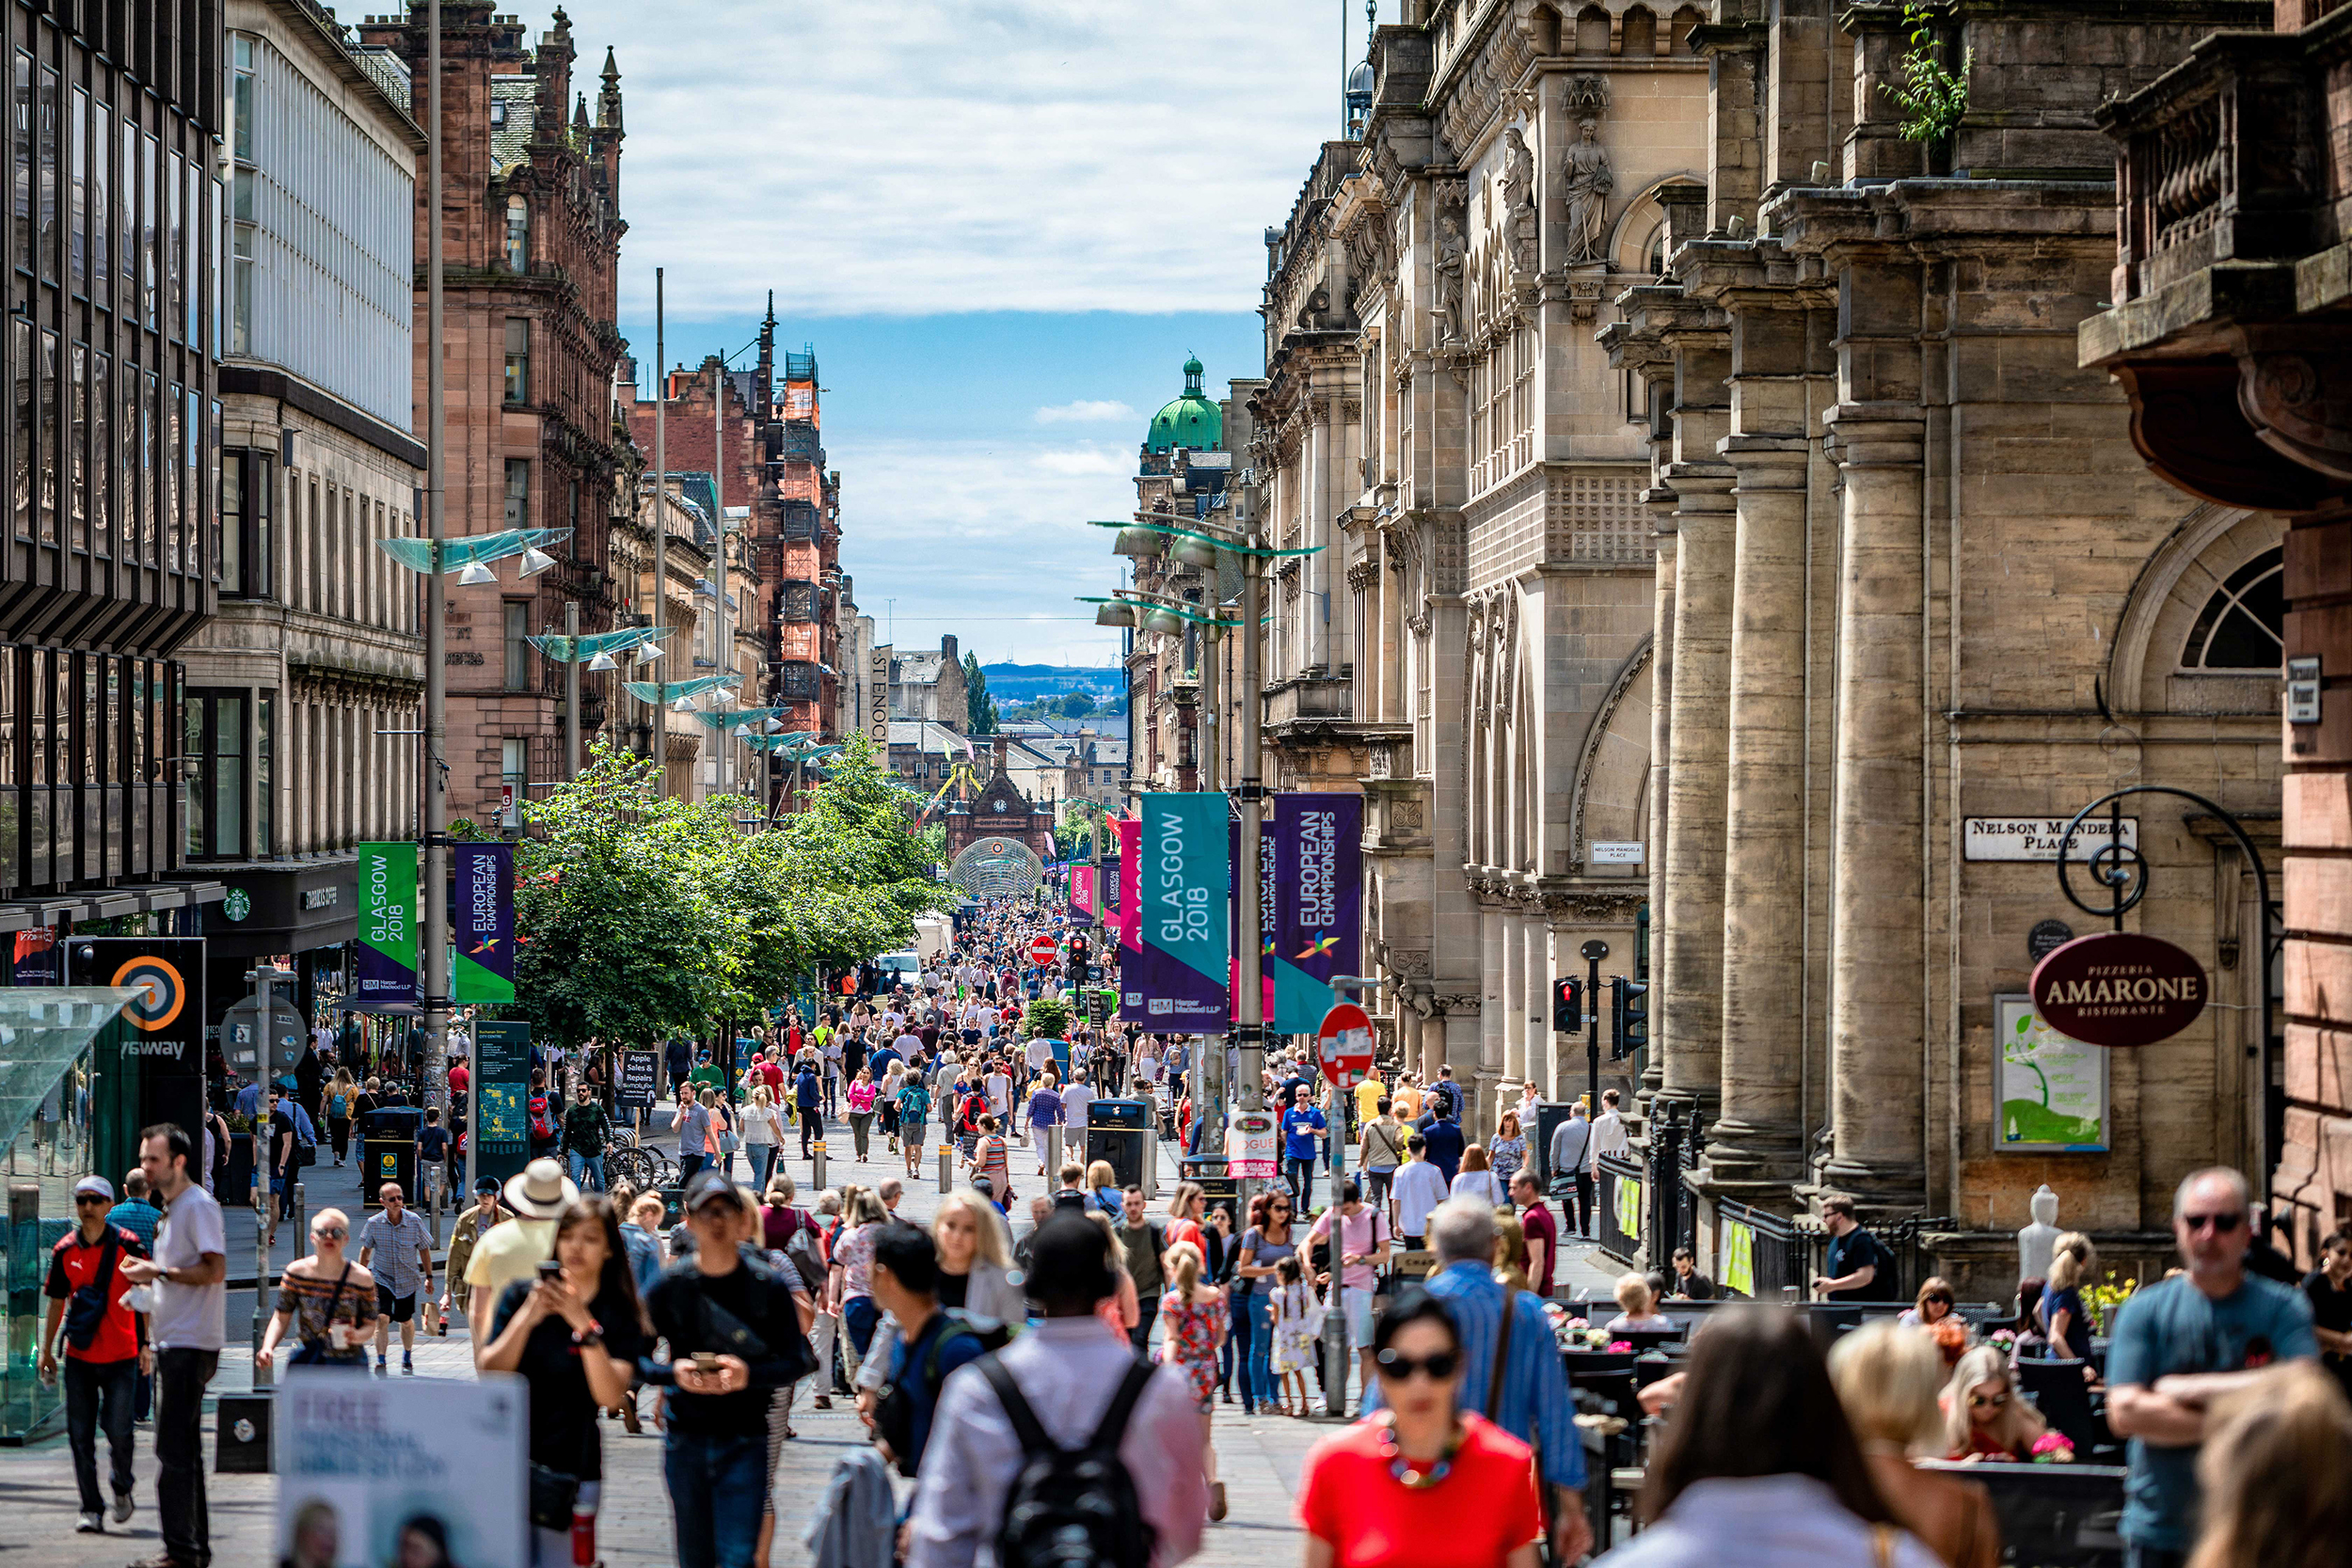 Crowds on Buchanan St in Glasgow on a sunny day